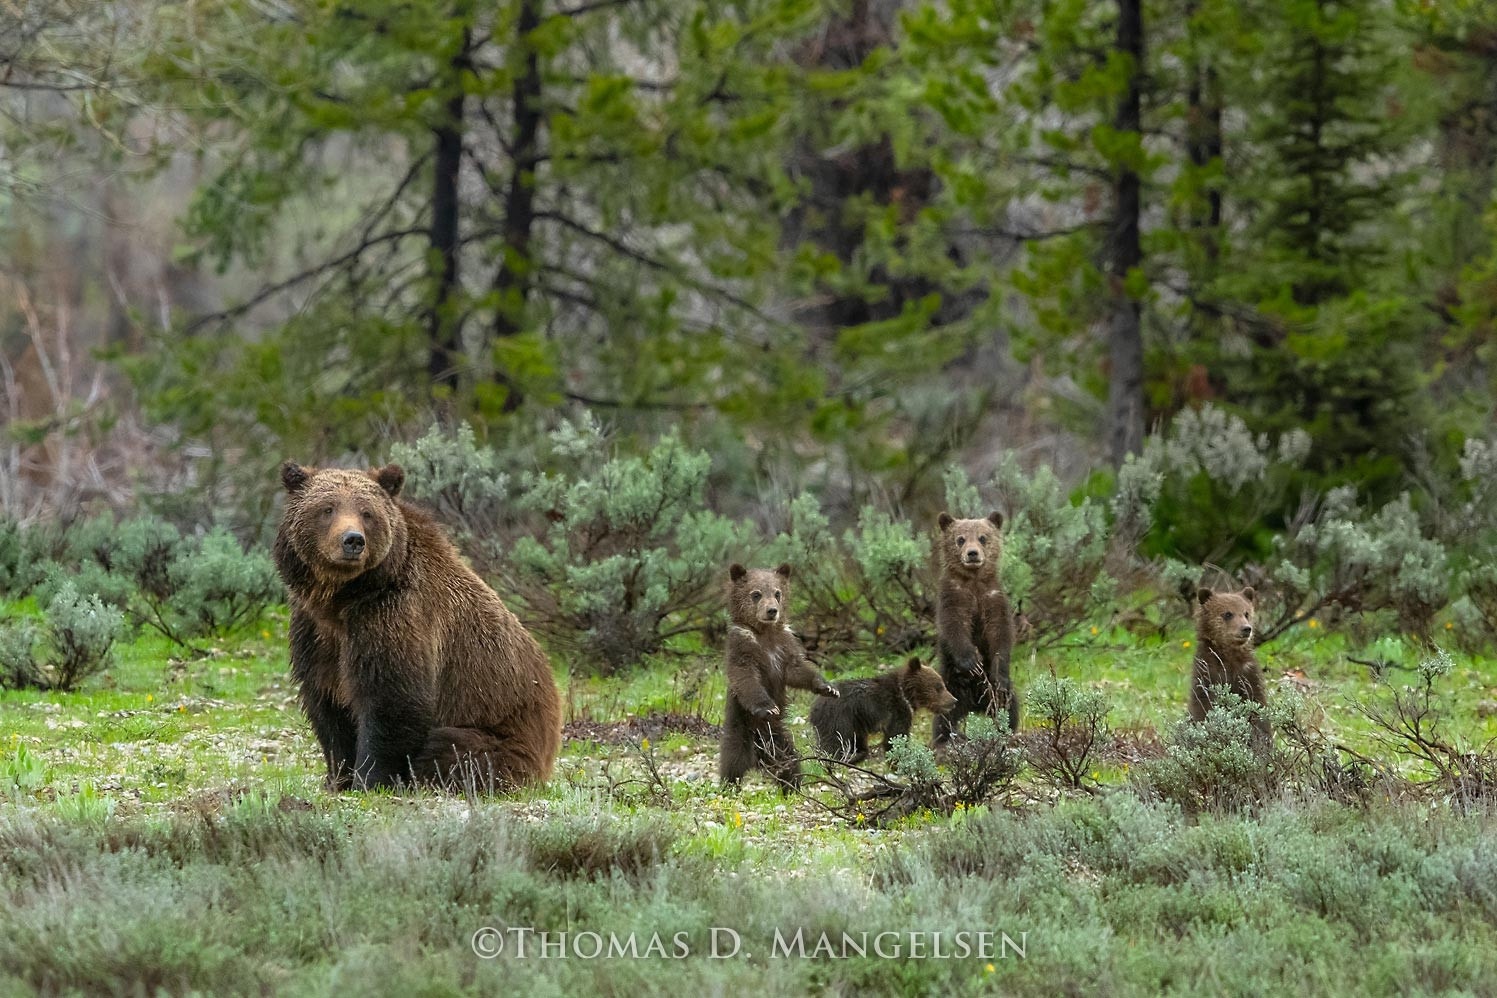 Jackson Hole grizzly mother 399 and her four cubs in 2020. Reportedly the famous bruin has been among different animals attracted to feeding carried out by a Jackson Hole resident, which has caused an uproar.  The image, "Among the Sage:  399 and Quadruplets" provided courtesy of Mangelsen (see more photos of 399 and family at mangelsen.com_